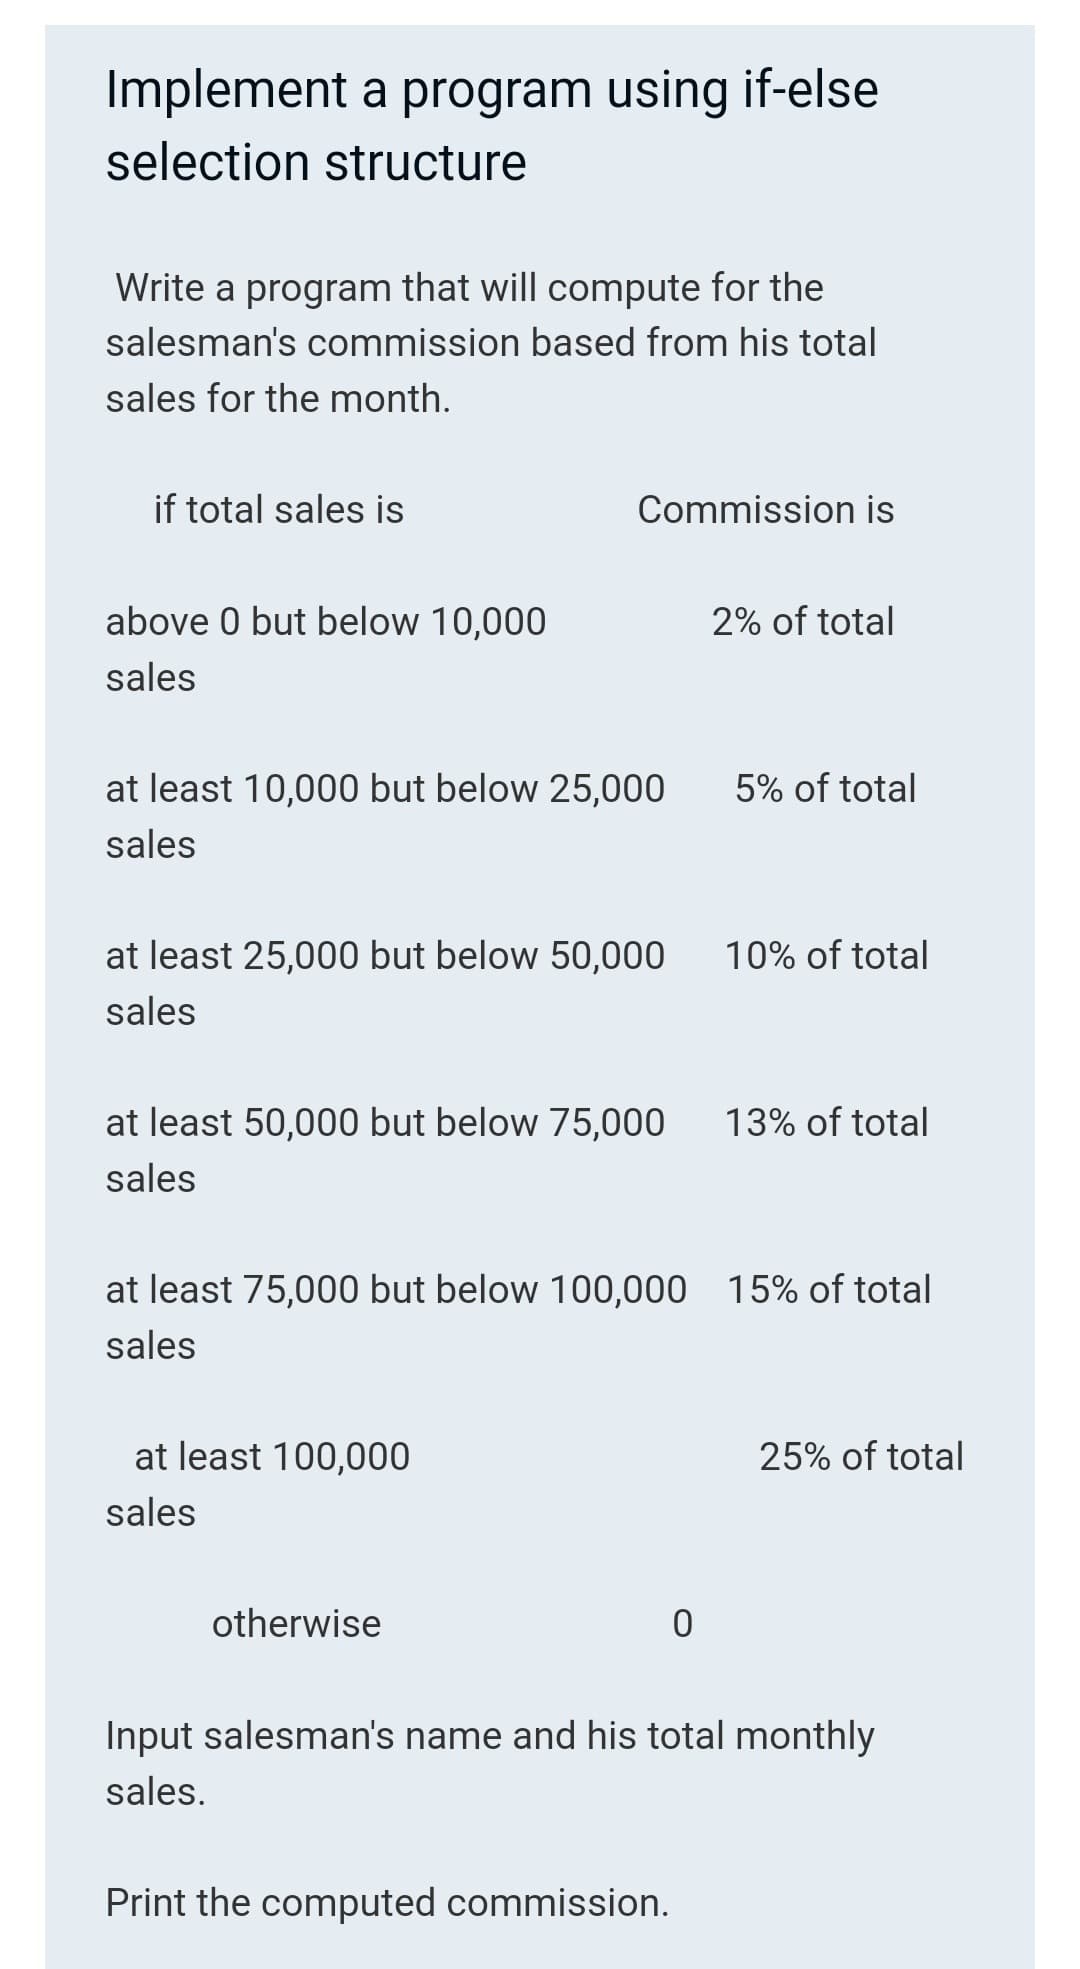 Implement a program using if-else
selection structure
Write a program that will compute for the
salesman's commission based from his total
sales for the month.
if total sales is
Commission is
above 0 but below 10,000
2% of total
sales
5% of total
at least 10,000 but below 25,000
sales
10% of total
at least 25,000 but below 50,000
sales
13% of total
at least 50,000 but below 75,000
sales
at least 75,000 but below 100,000 15% of total
sales
25% of total
at least 100,000
sales
otherwise
0
Input salesman's name and his total monthly
sales.
Print the computed commission.